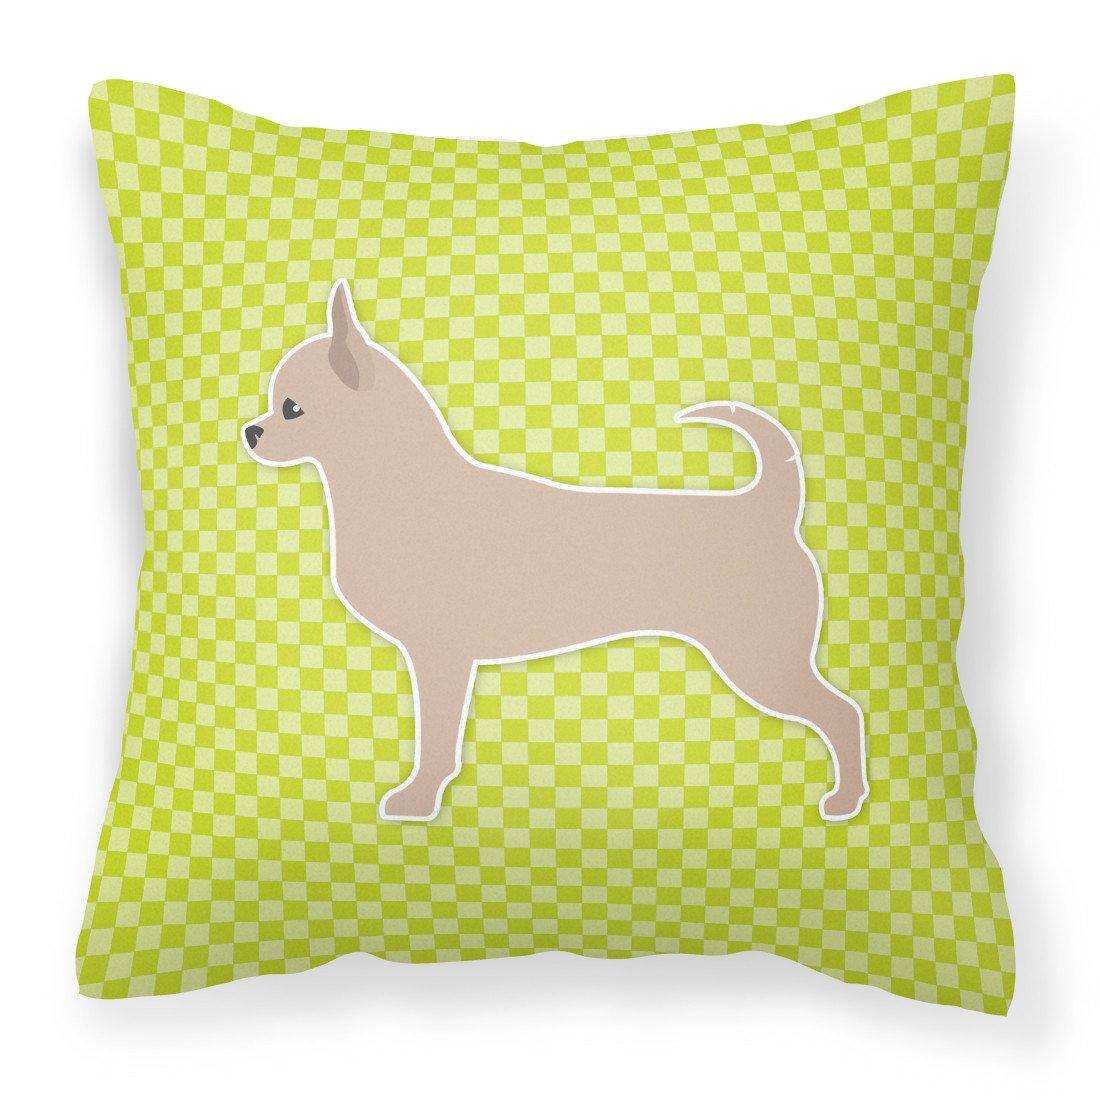 Chihuahua Checkerboard Green Fabric Decorative Pillow BB3850PW1818 by Caroline's Treasures